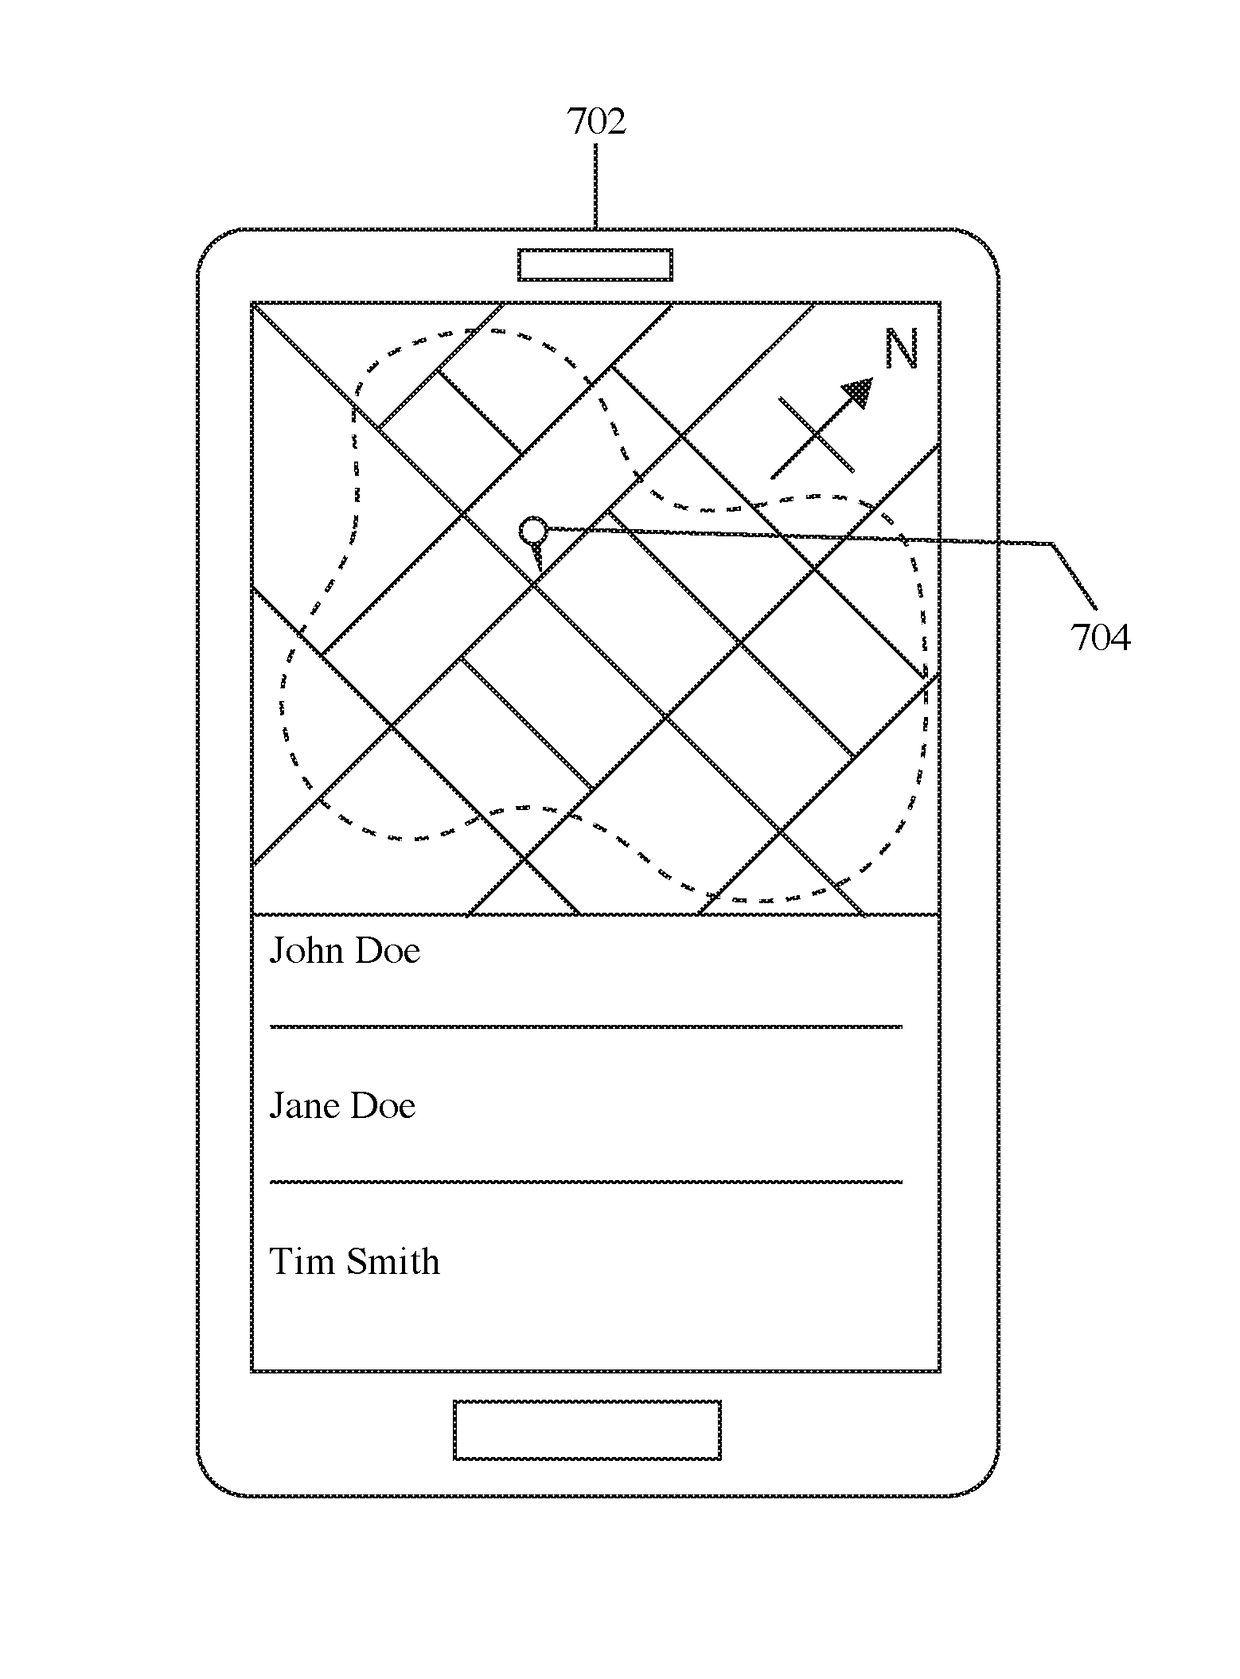 Systems and methods for tracking mobile points of interest